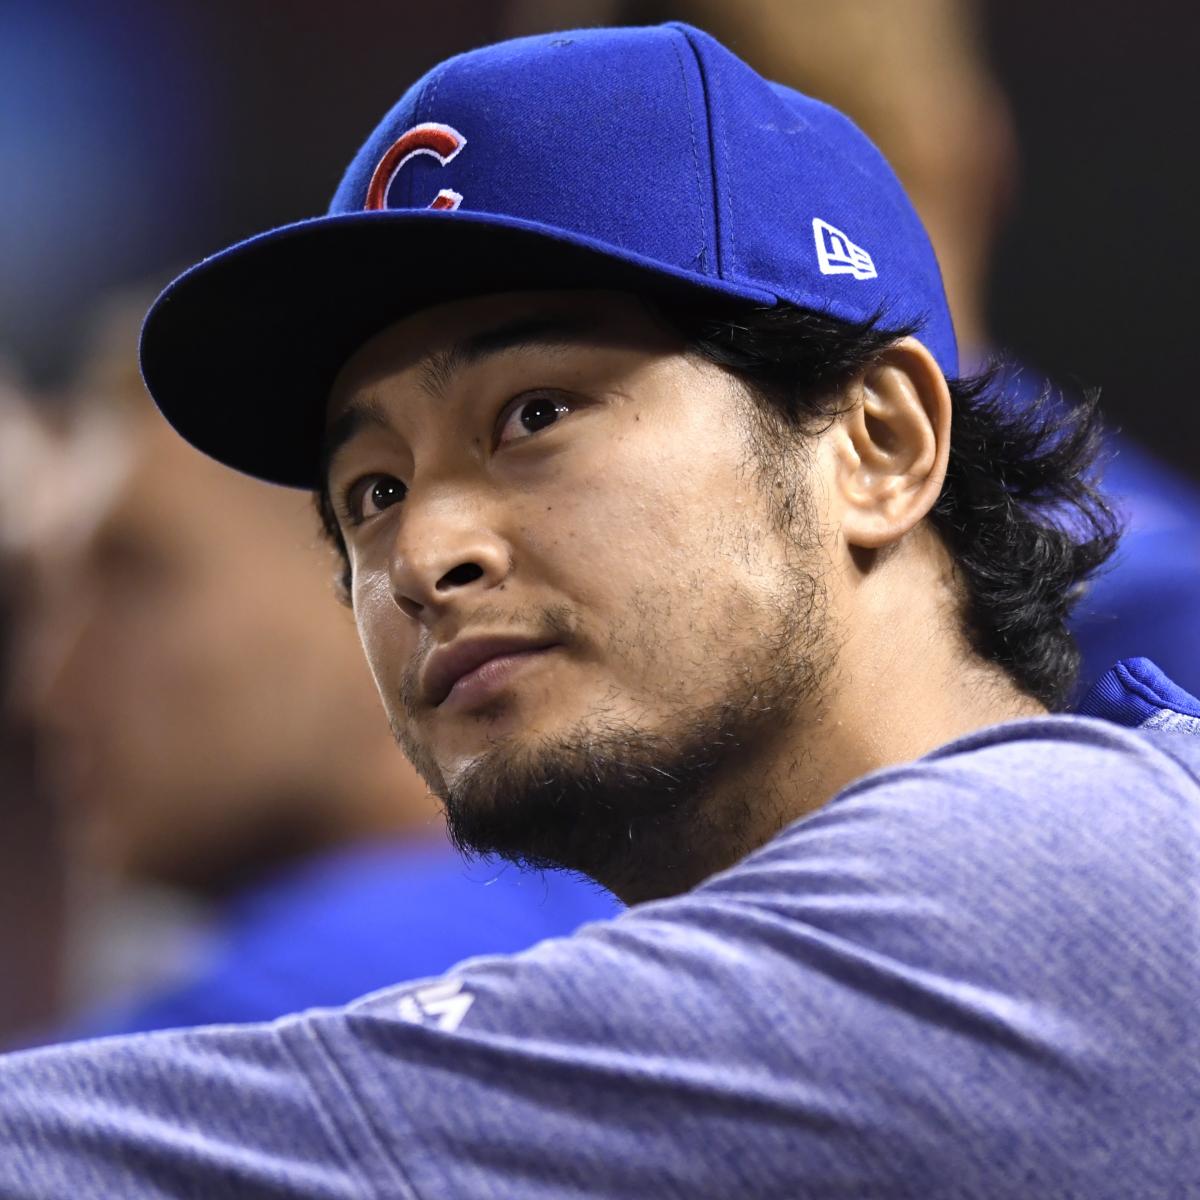 Yu Darvish Donates $10K to ALS Research After Death of Stephen